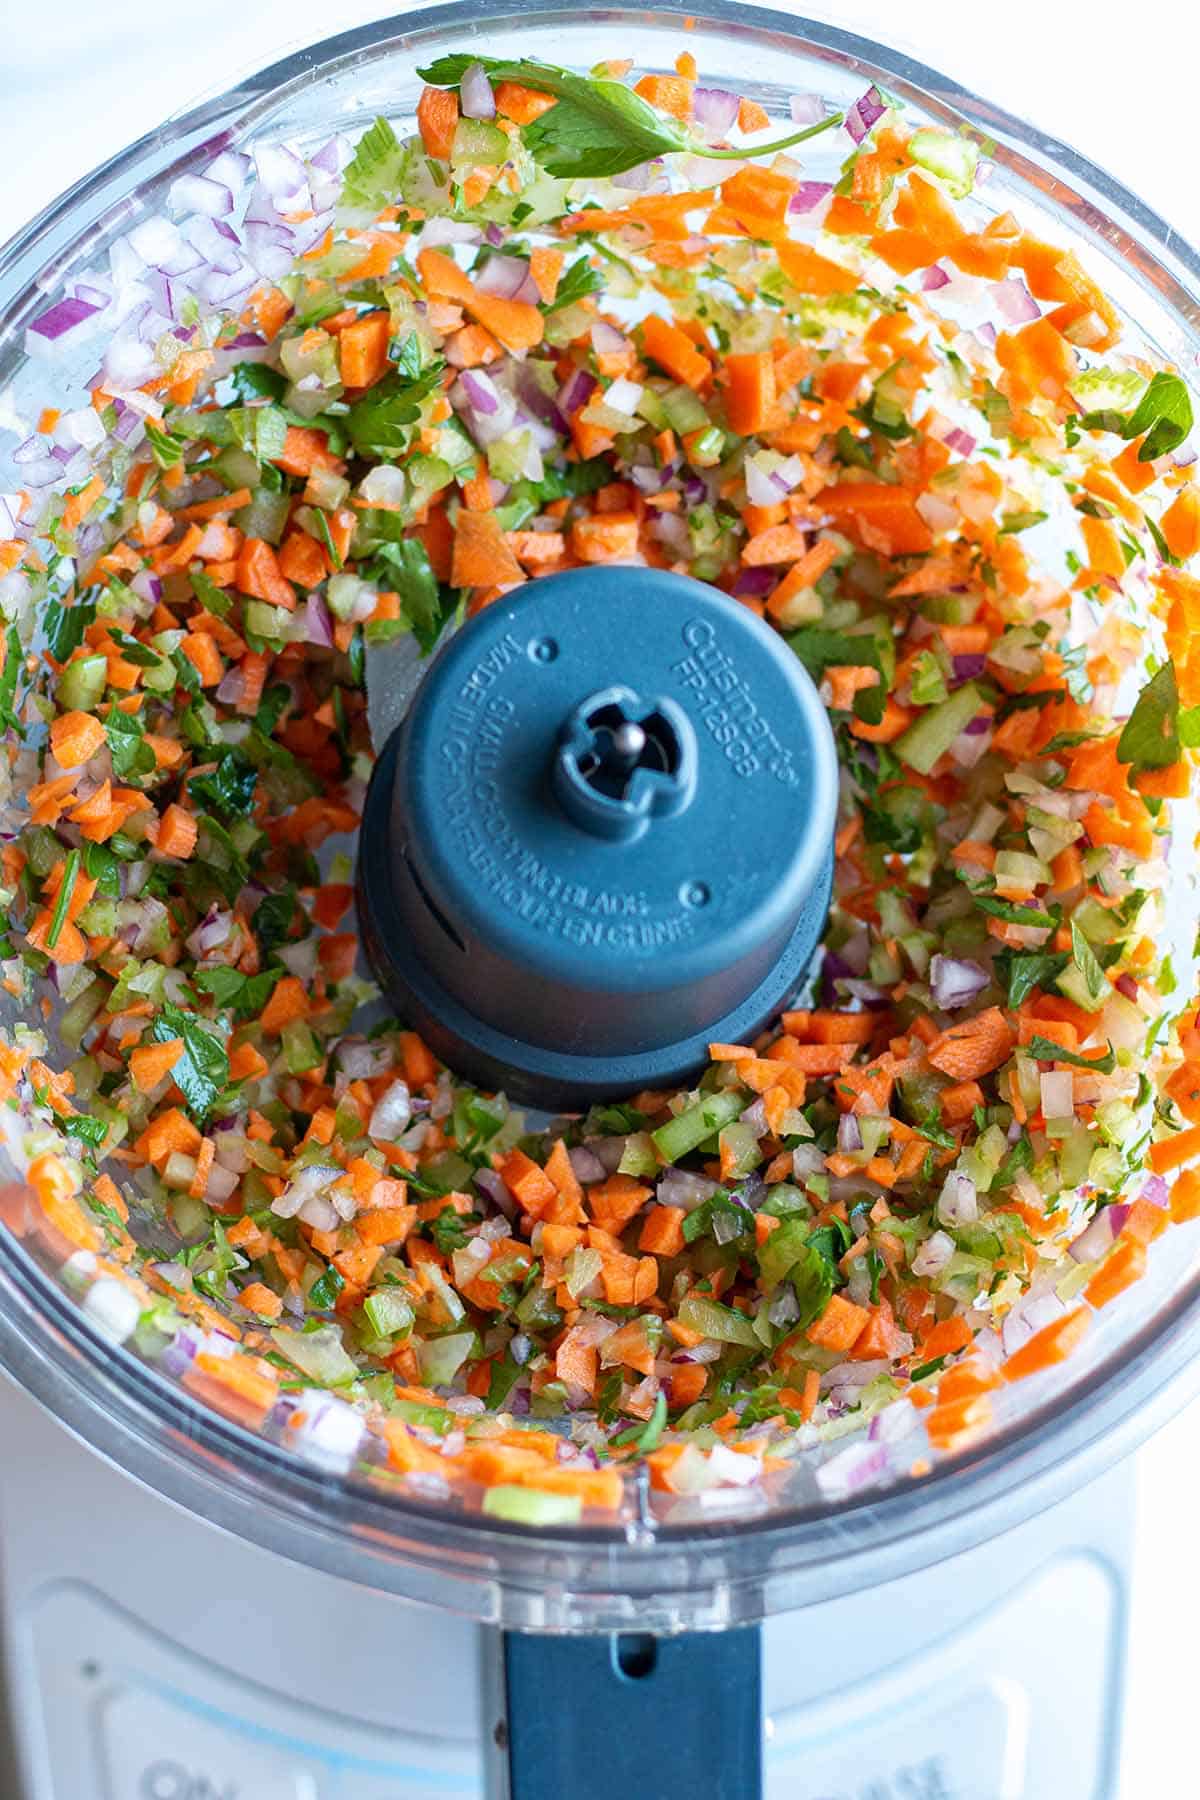 A food processor with finally diced veggies.